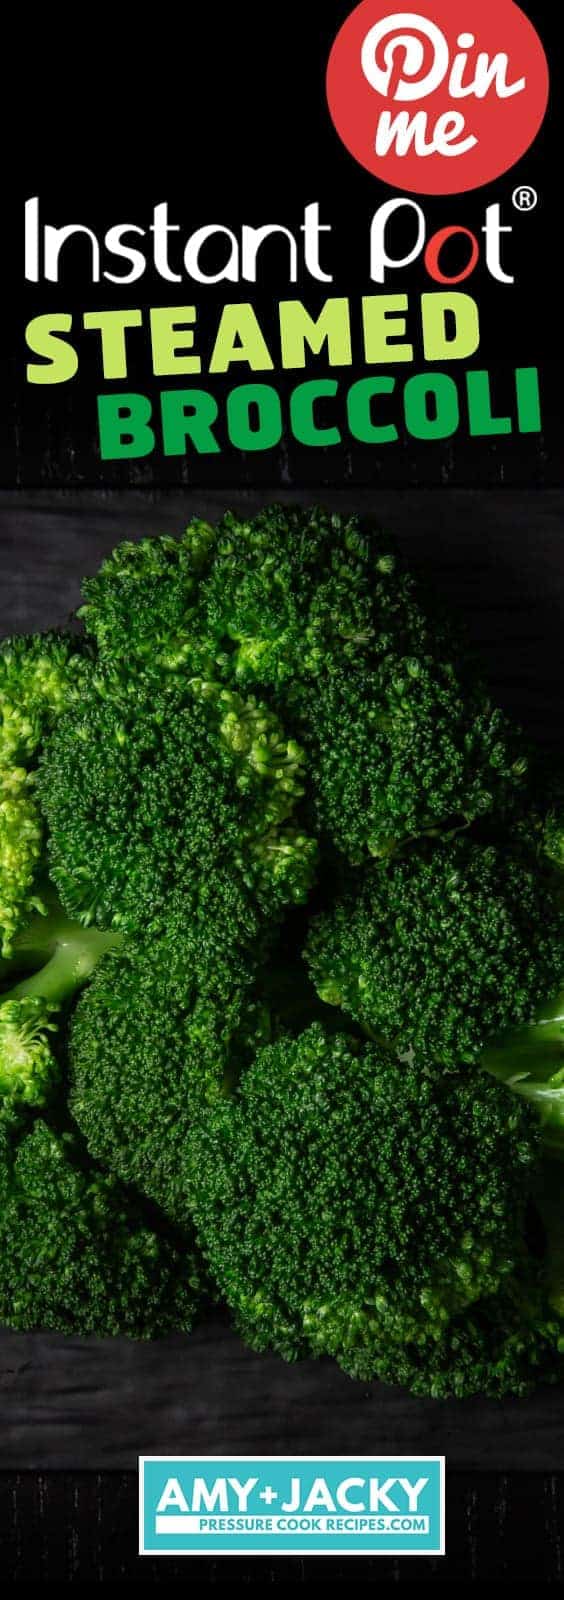 Instant Pot Broccoli Recipe: Make Easy & Quick Steamed Broccoli in Instant Pot with perfect texture every time! Deliciously healthy side dish. #instantpot #pressurecooker #vegan #vegetarian #recipe